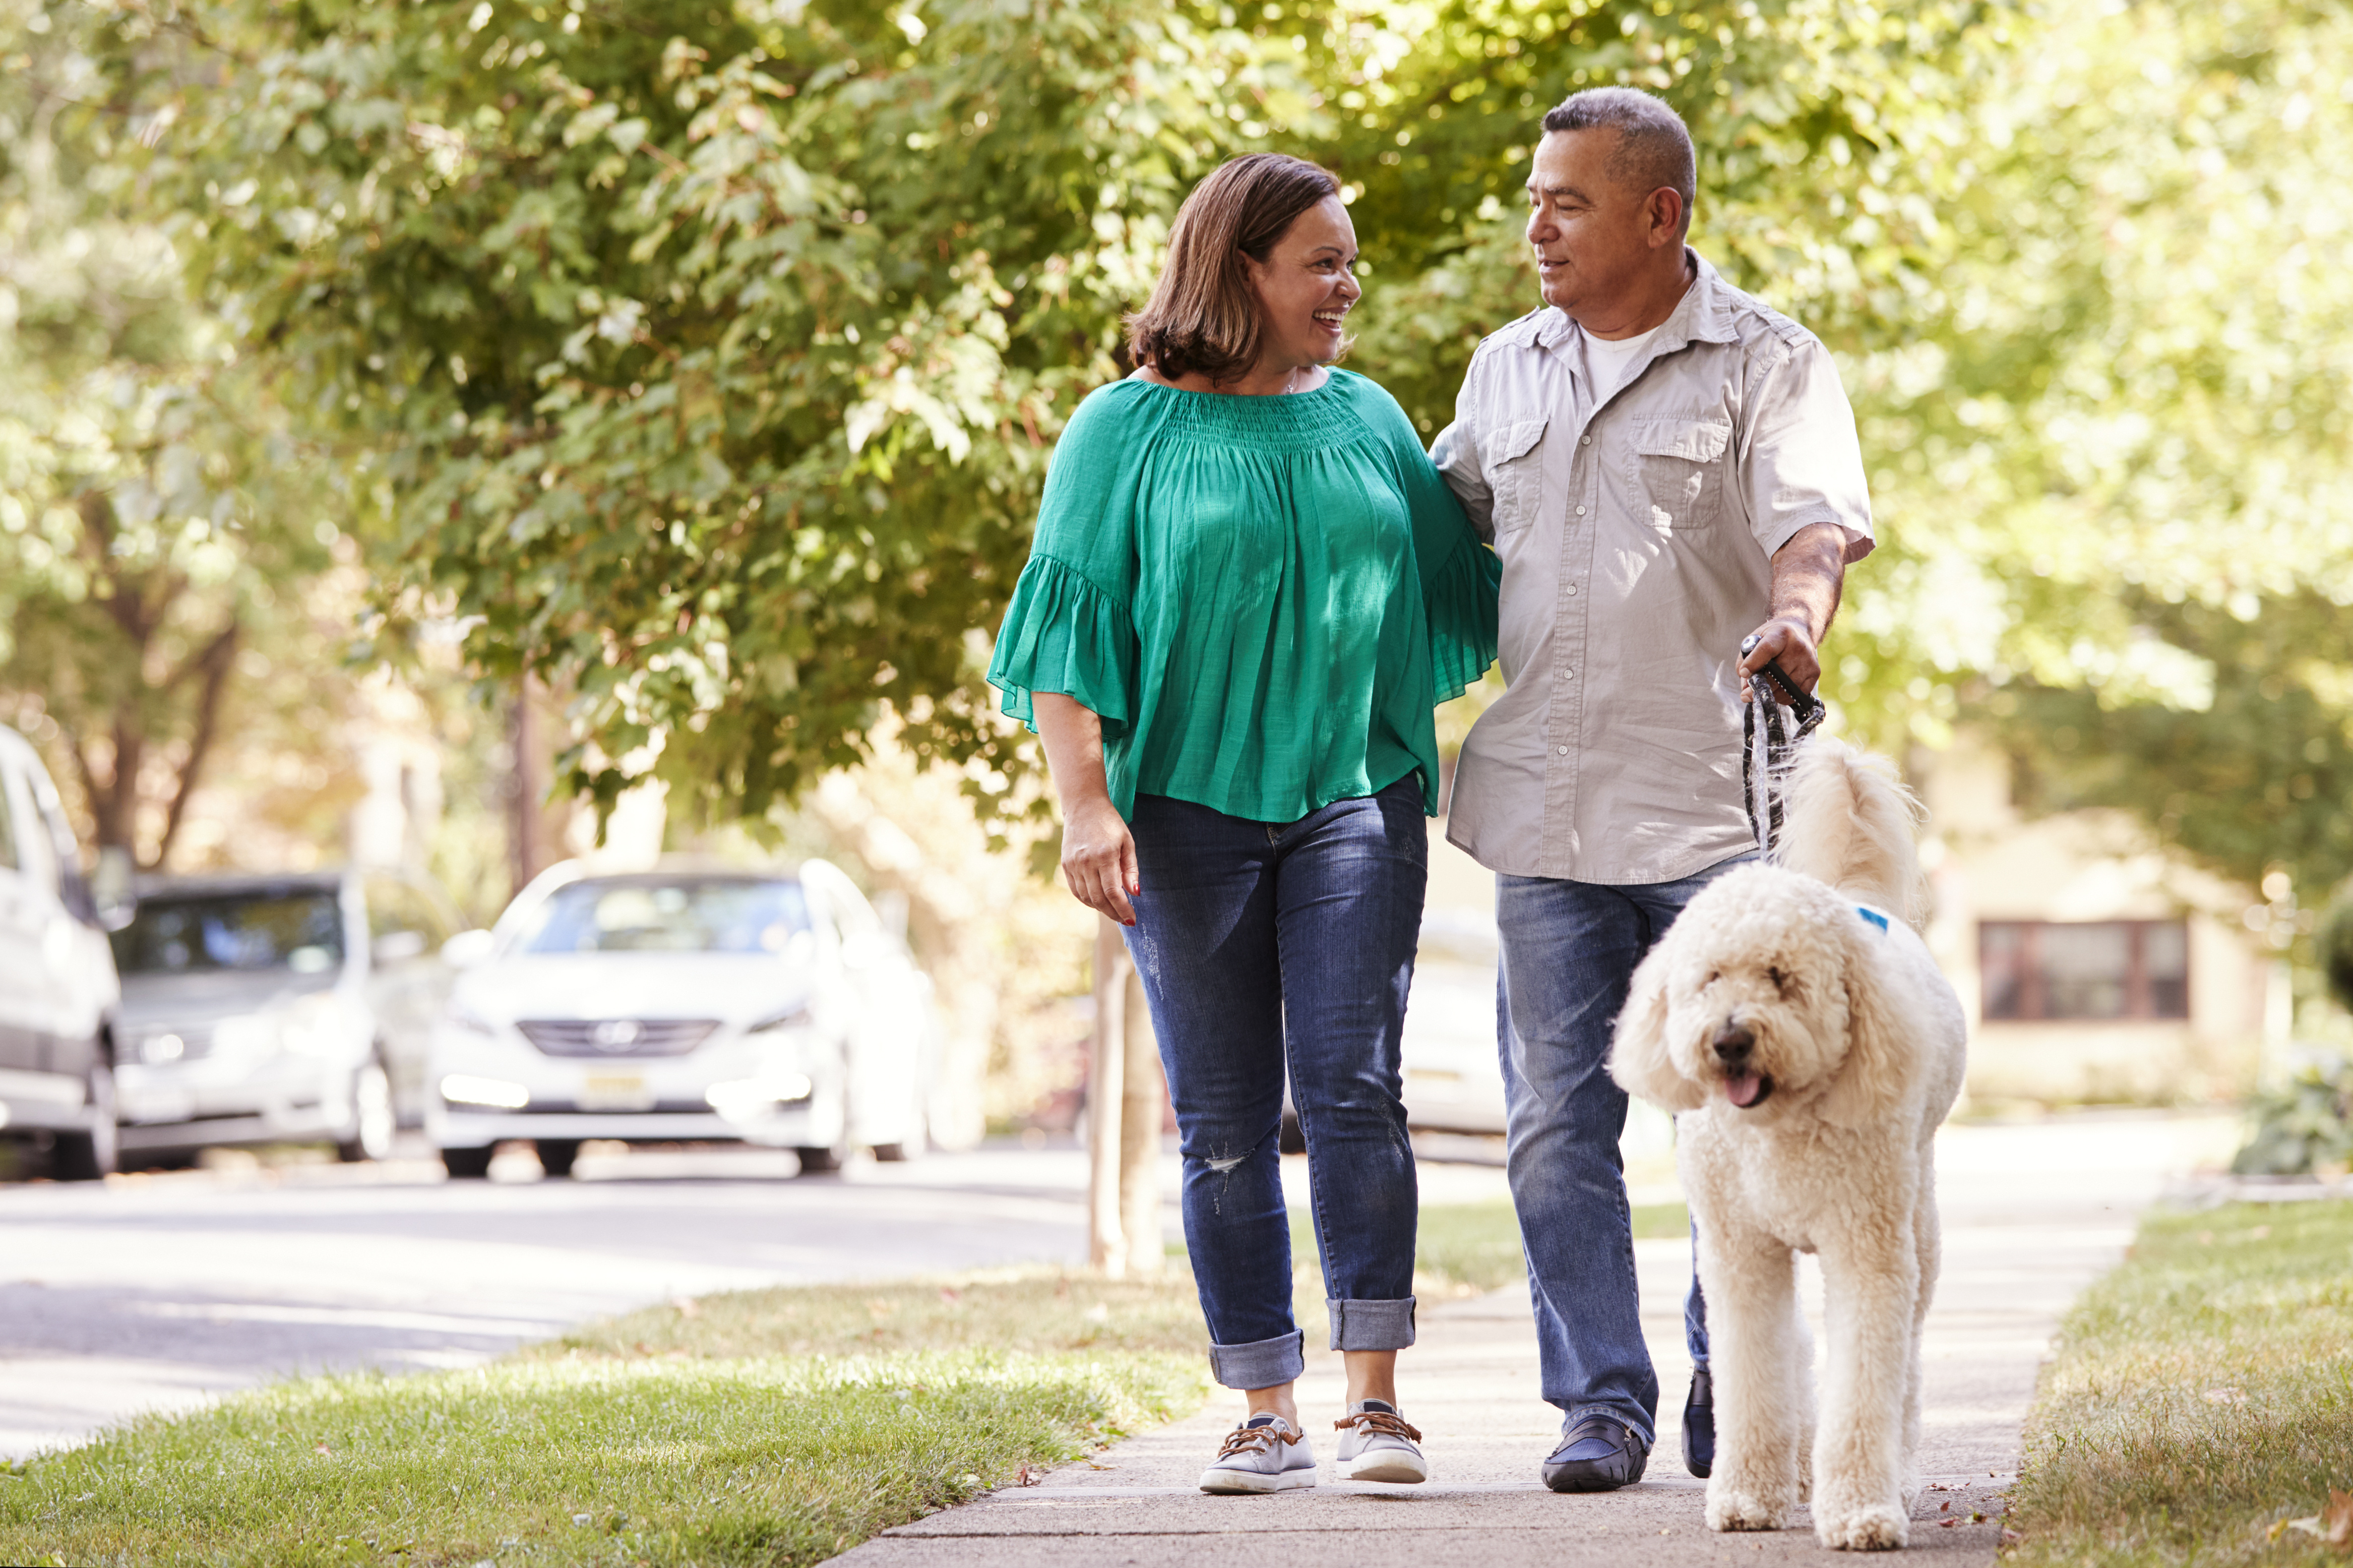 husband and wife with dog - when to start screening for colon and rectal cancers